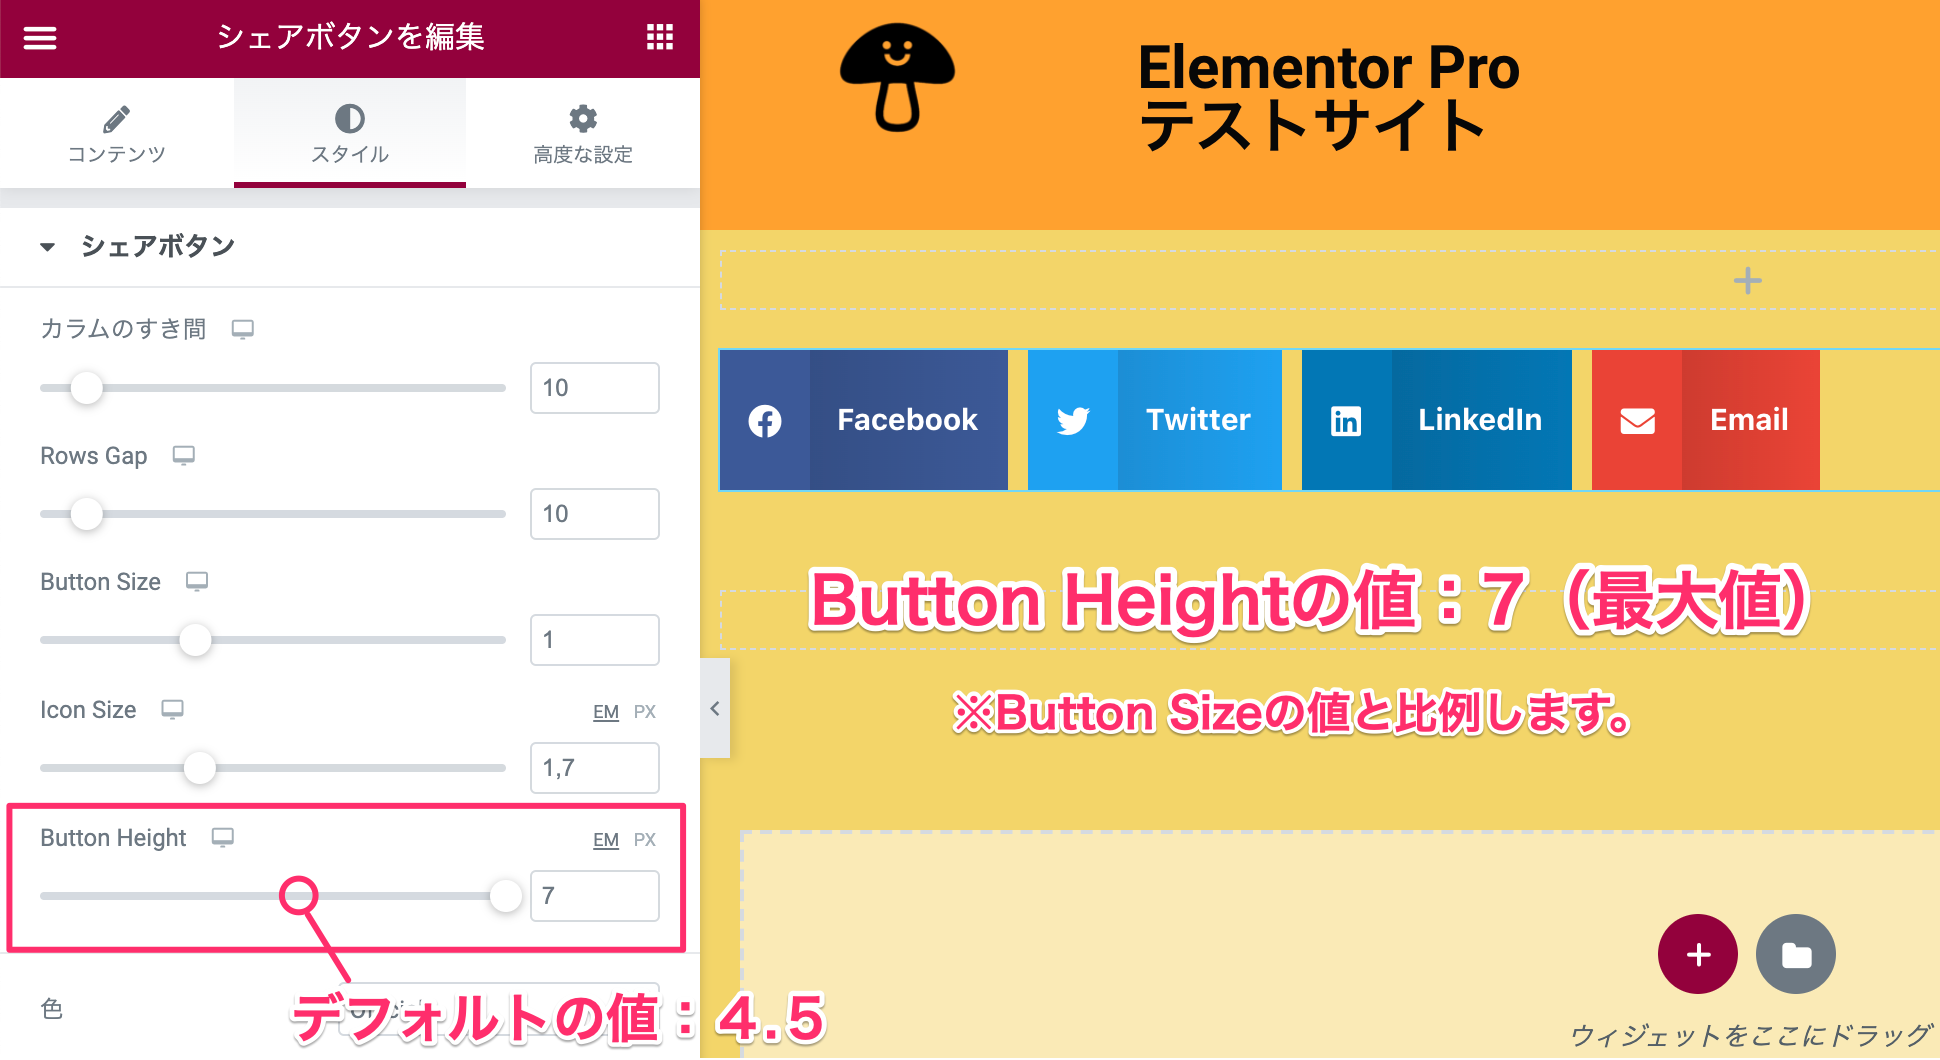 Button Heightの説明・値を7（最大値）にしたときの表示画面